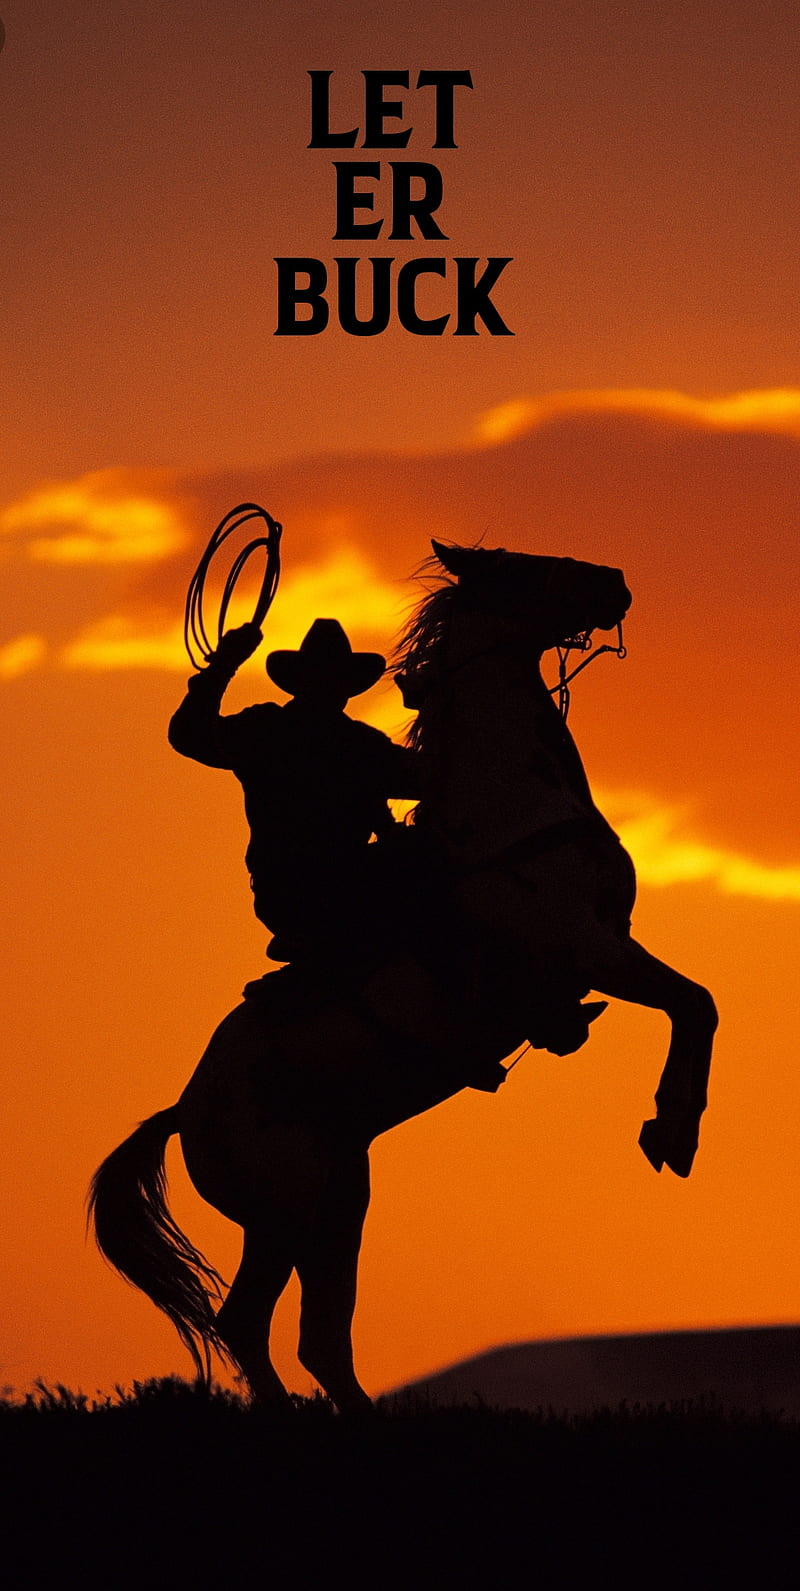 Mobile wallpaper Sunset Silhouette Horse Photography Cowboy 1342956  download the picture for free